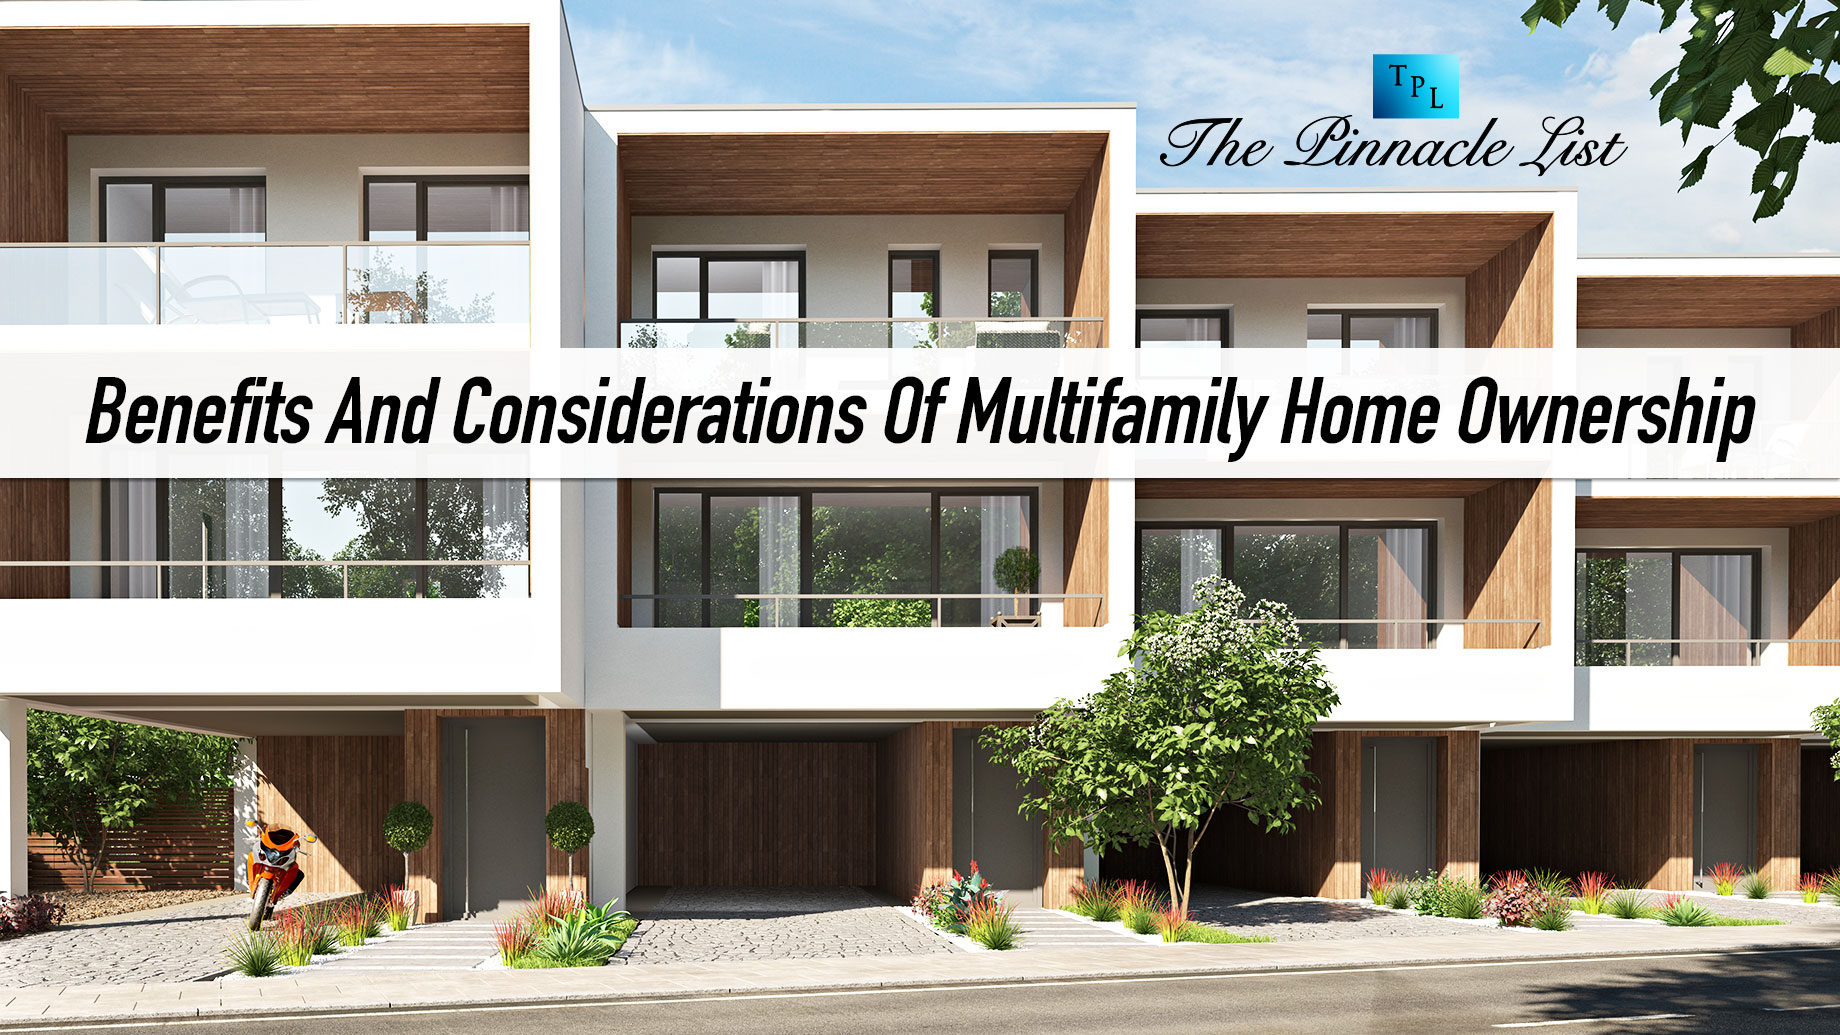 Benefits And Considerations Of Multifamily Home Ownership